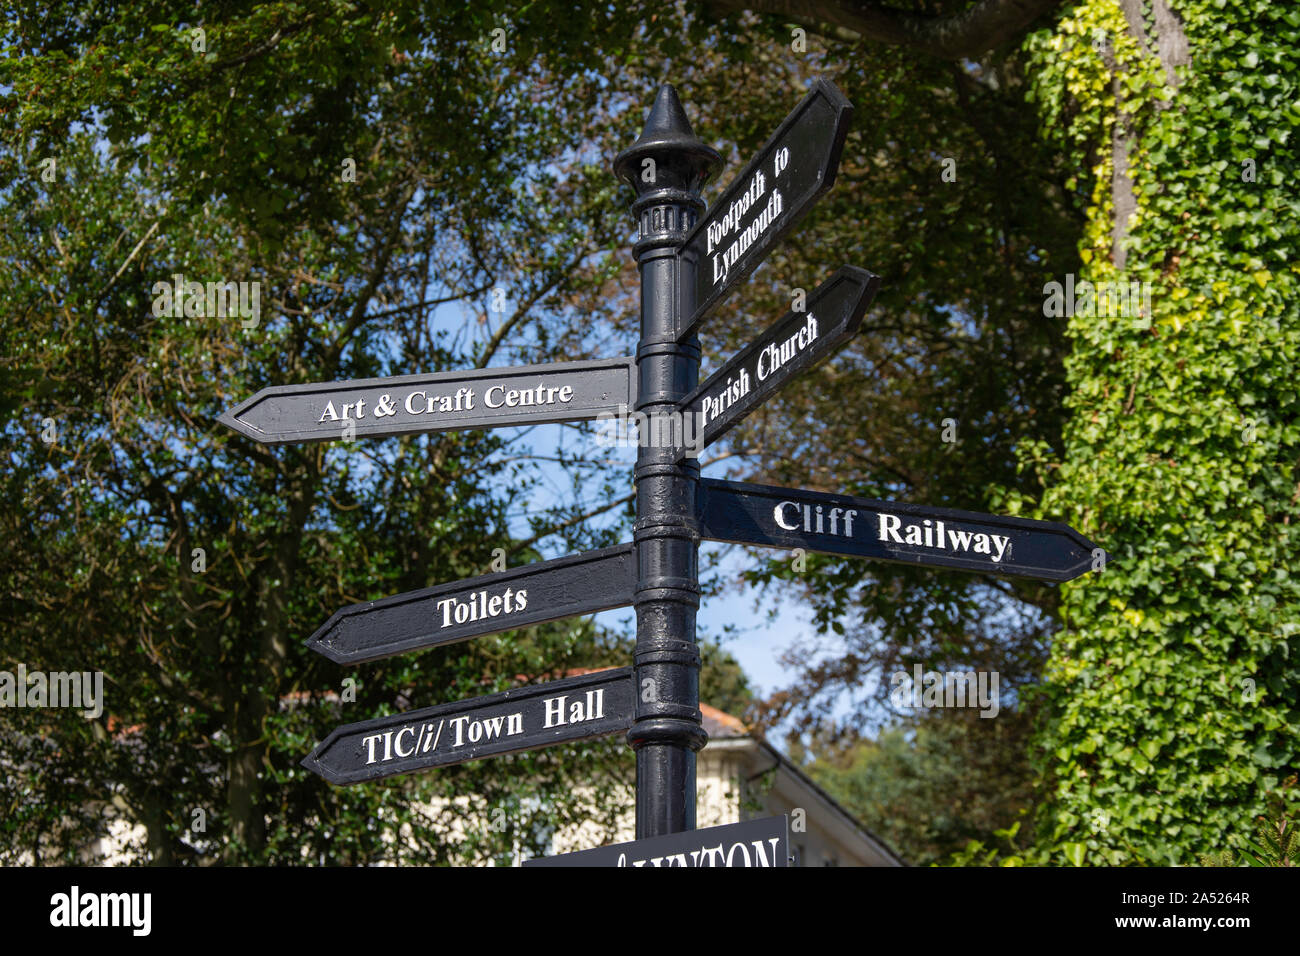 Attractions signpost, Lynton, Devon, Angleterre, Royaume-Uni Banque D'Images